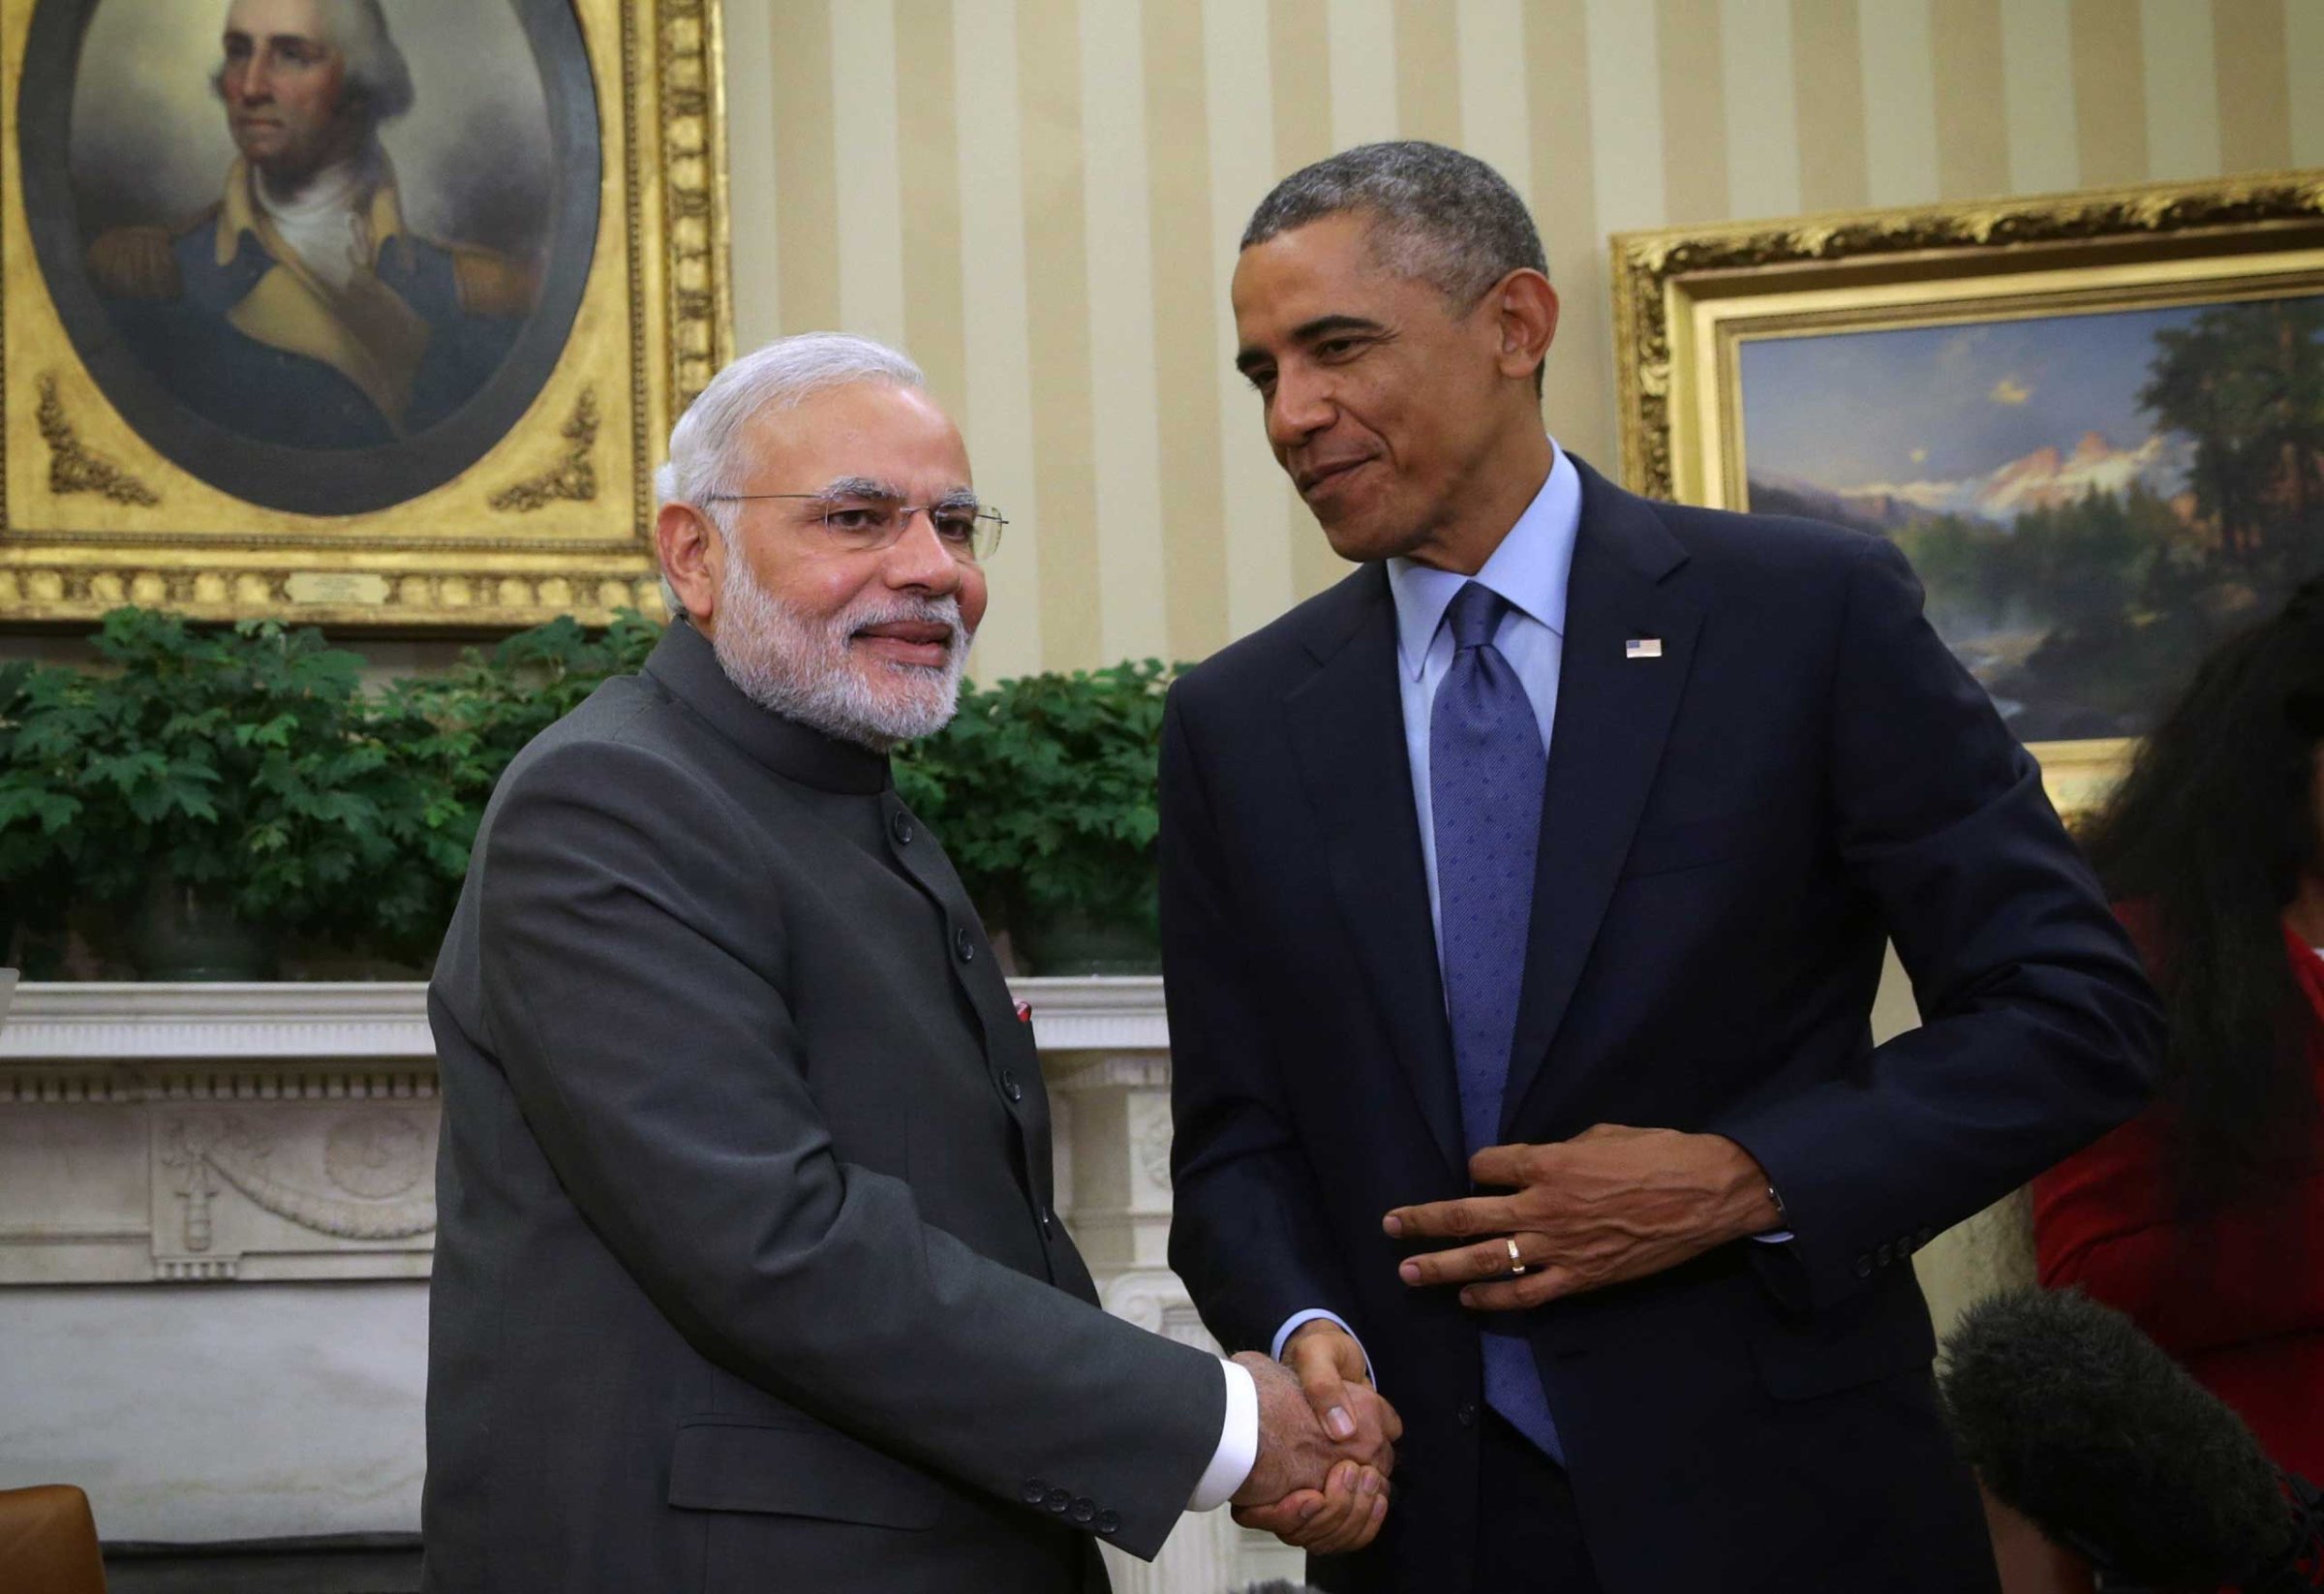 President Obama Meets With Prime Minister Narendra Modi Of India At The White House